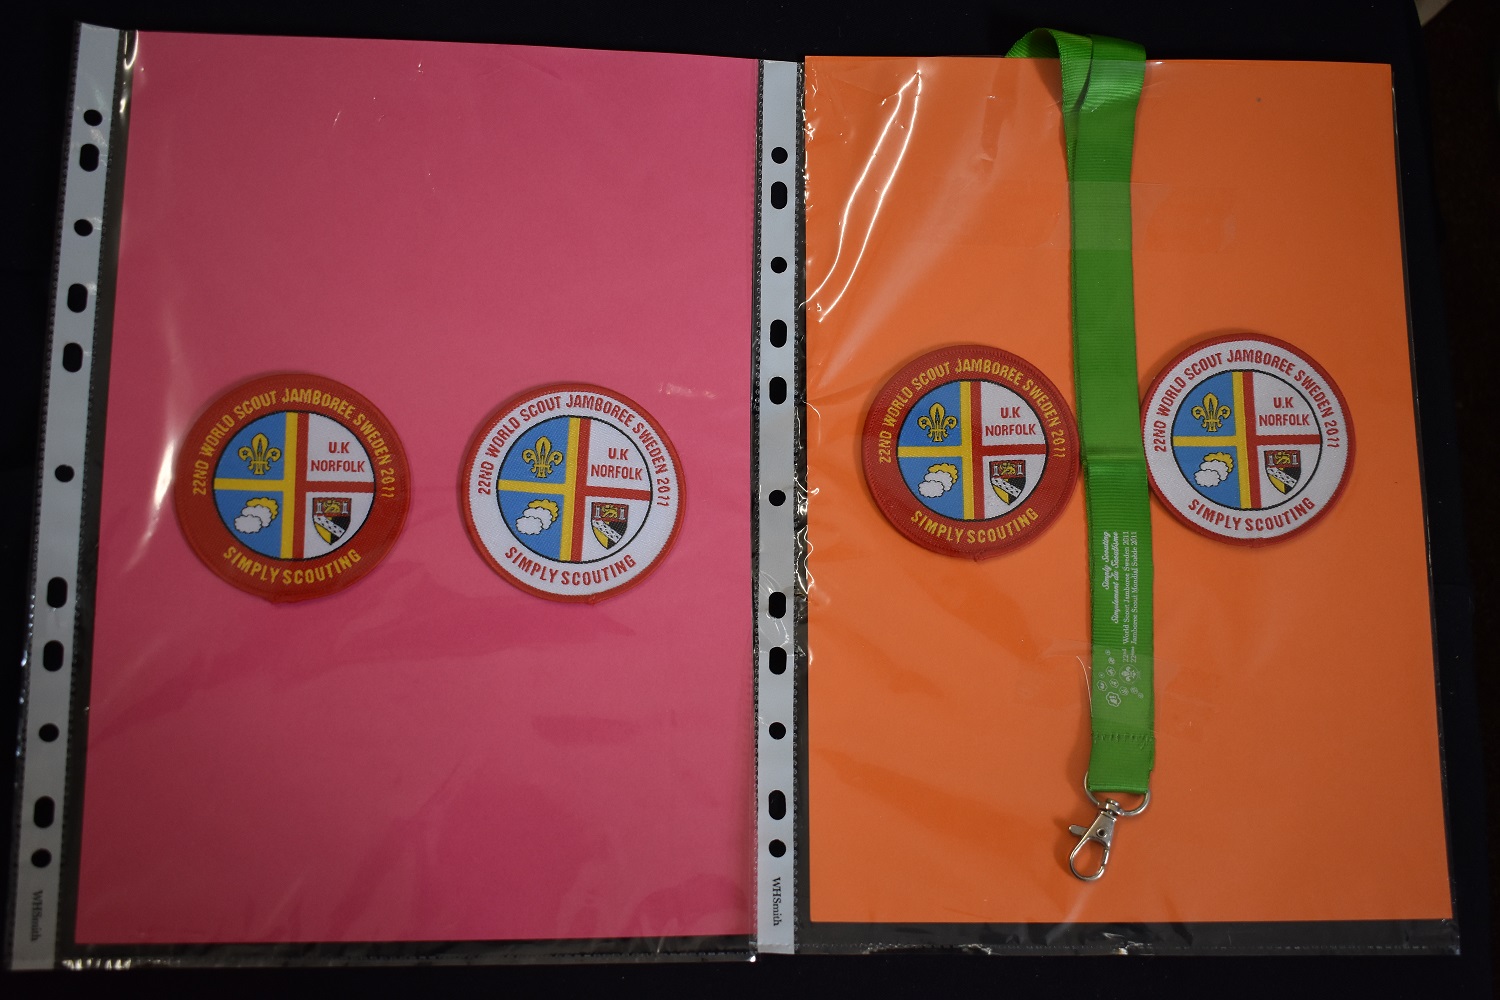 Scouting Fine collection of Sweden 2011 Jamboree with badges, buttons and belts. Includes scarce fo - Image 2 of 4